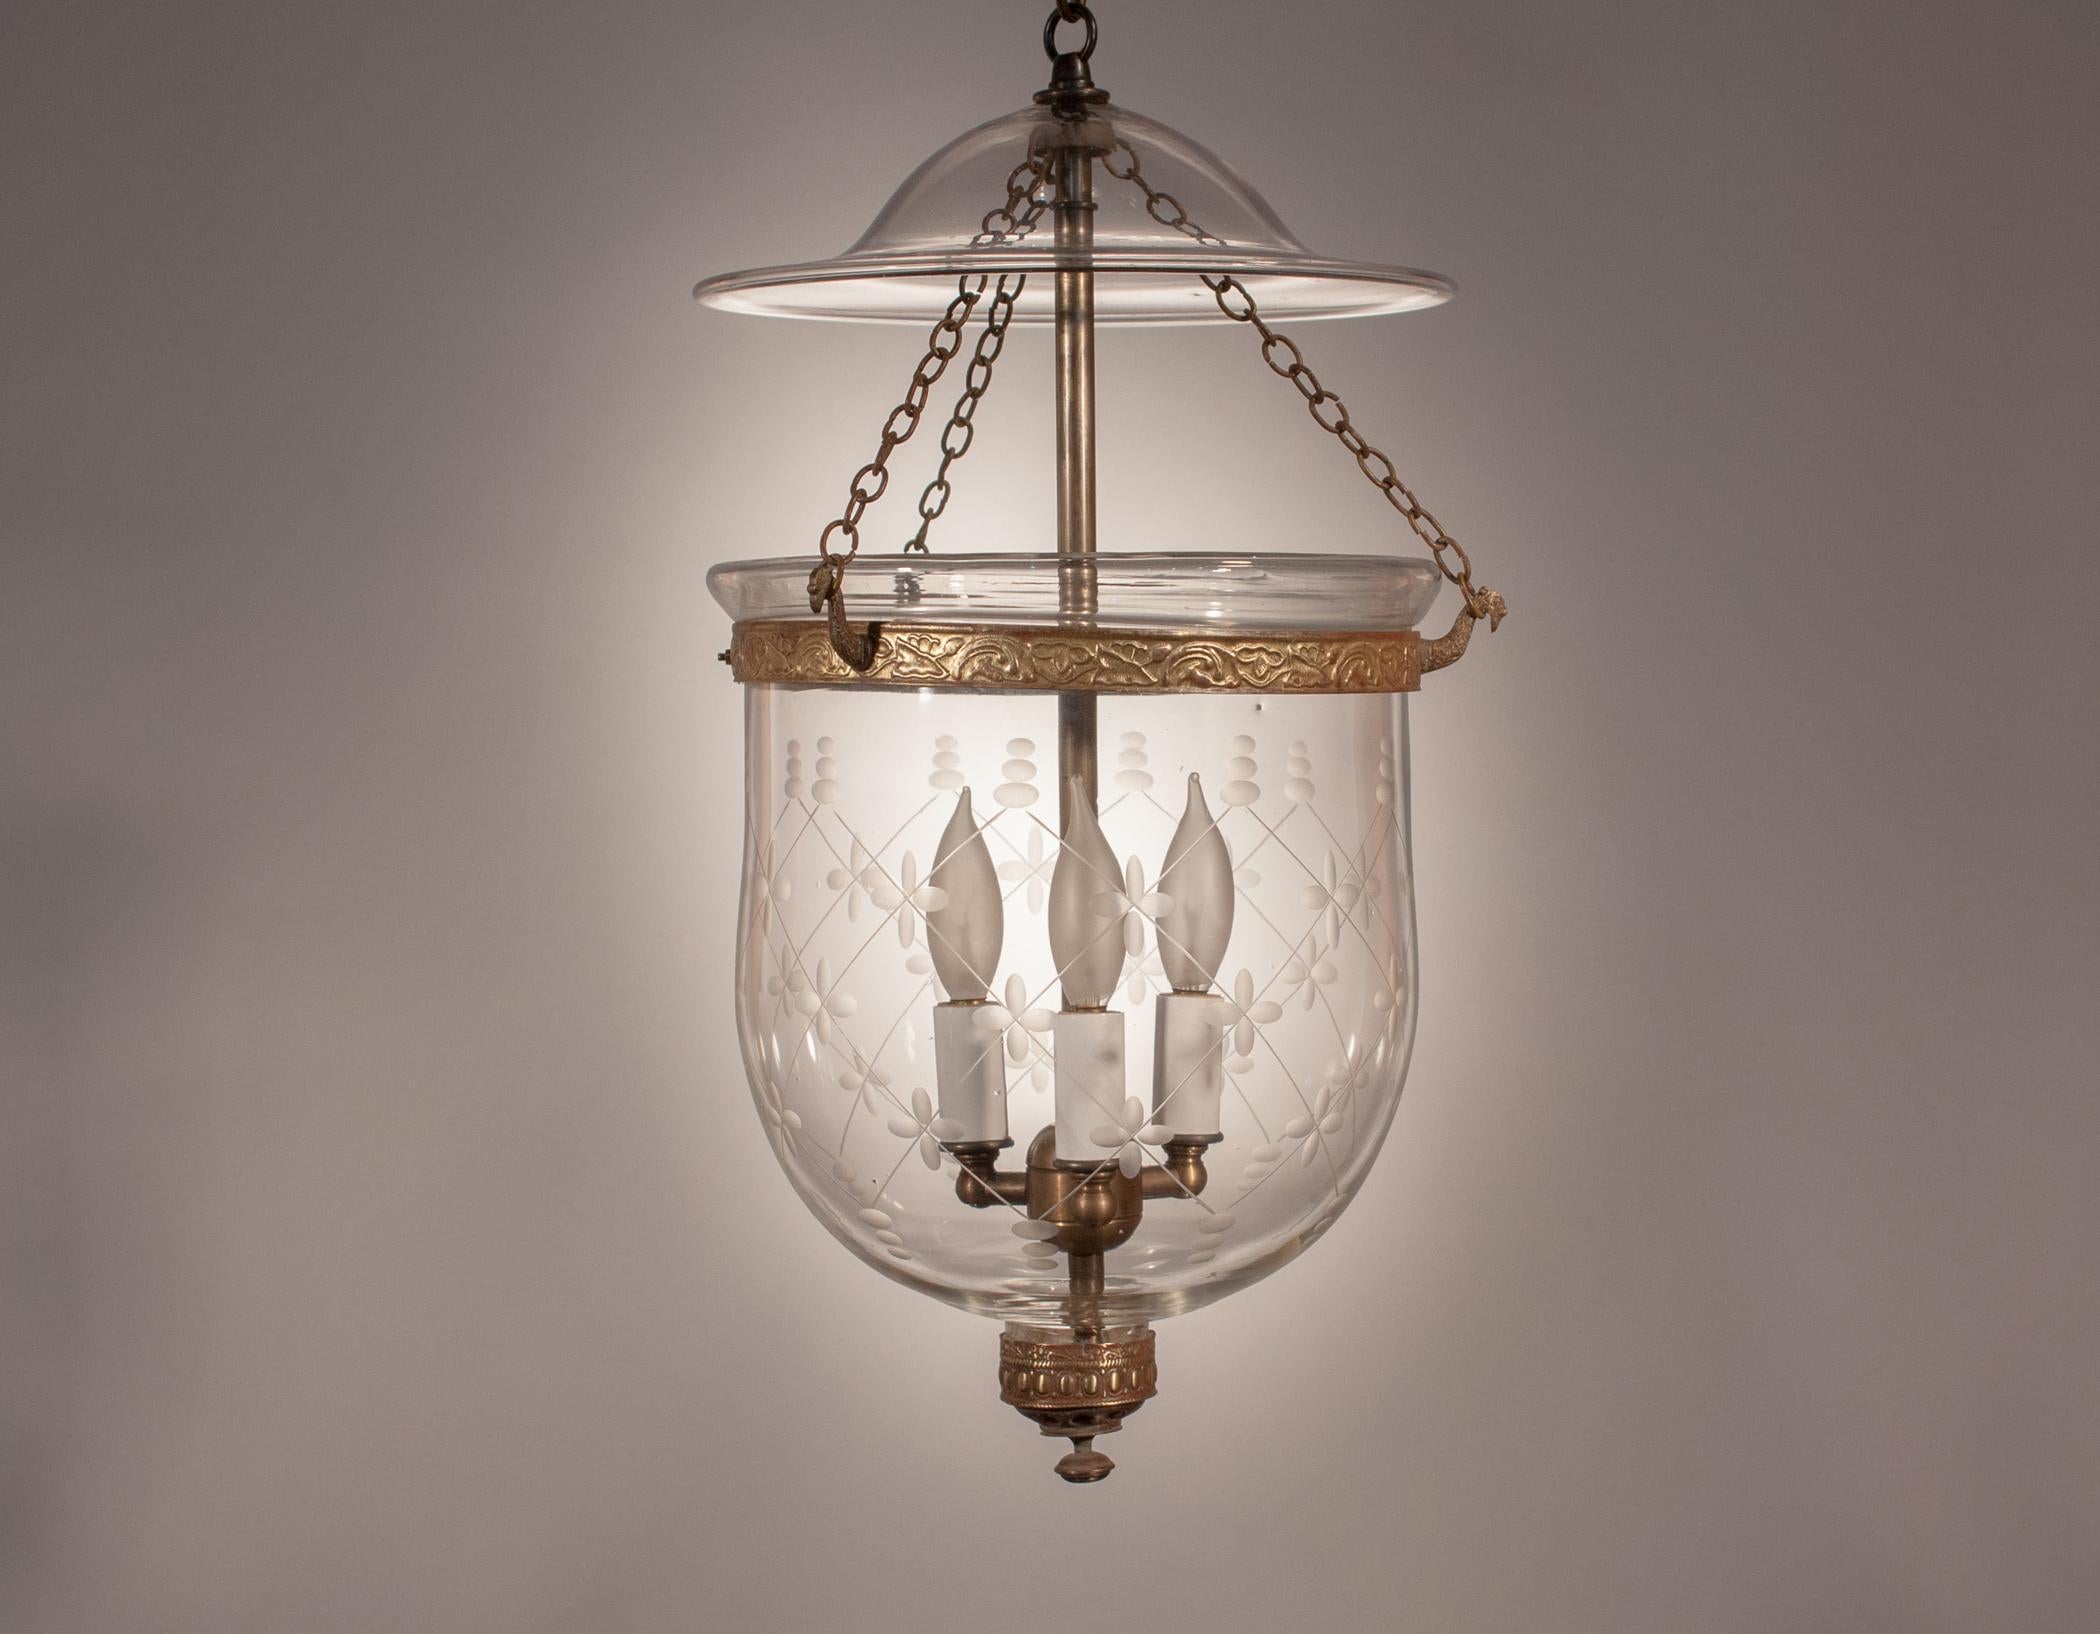 A fine quality handblown glass bell jar lantern having an etched trellis pattern that complements the full form of this shapely hall lantern. The lantern's embellished brass finial and embossed brass band have a rich gold tone. The band and chain